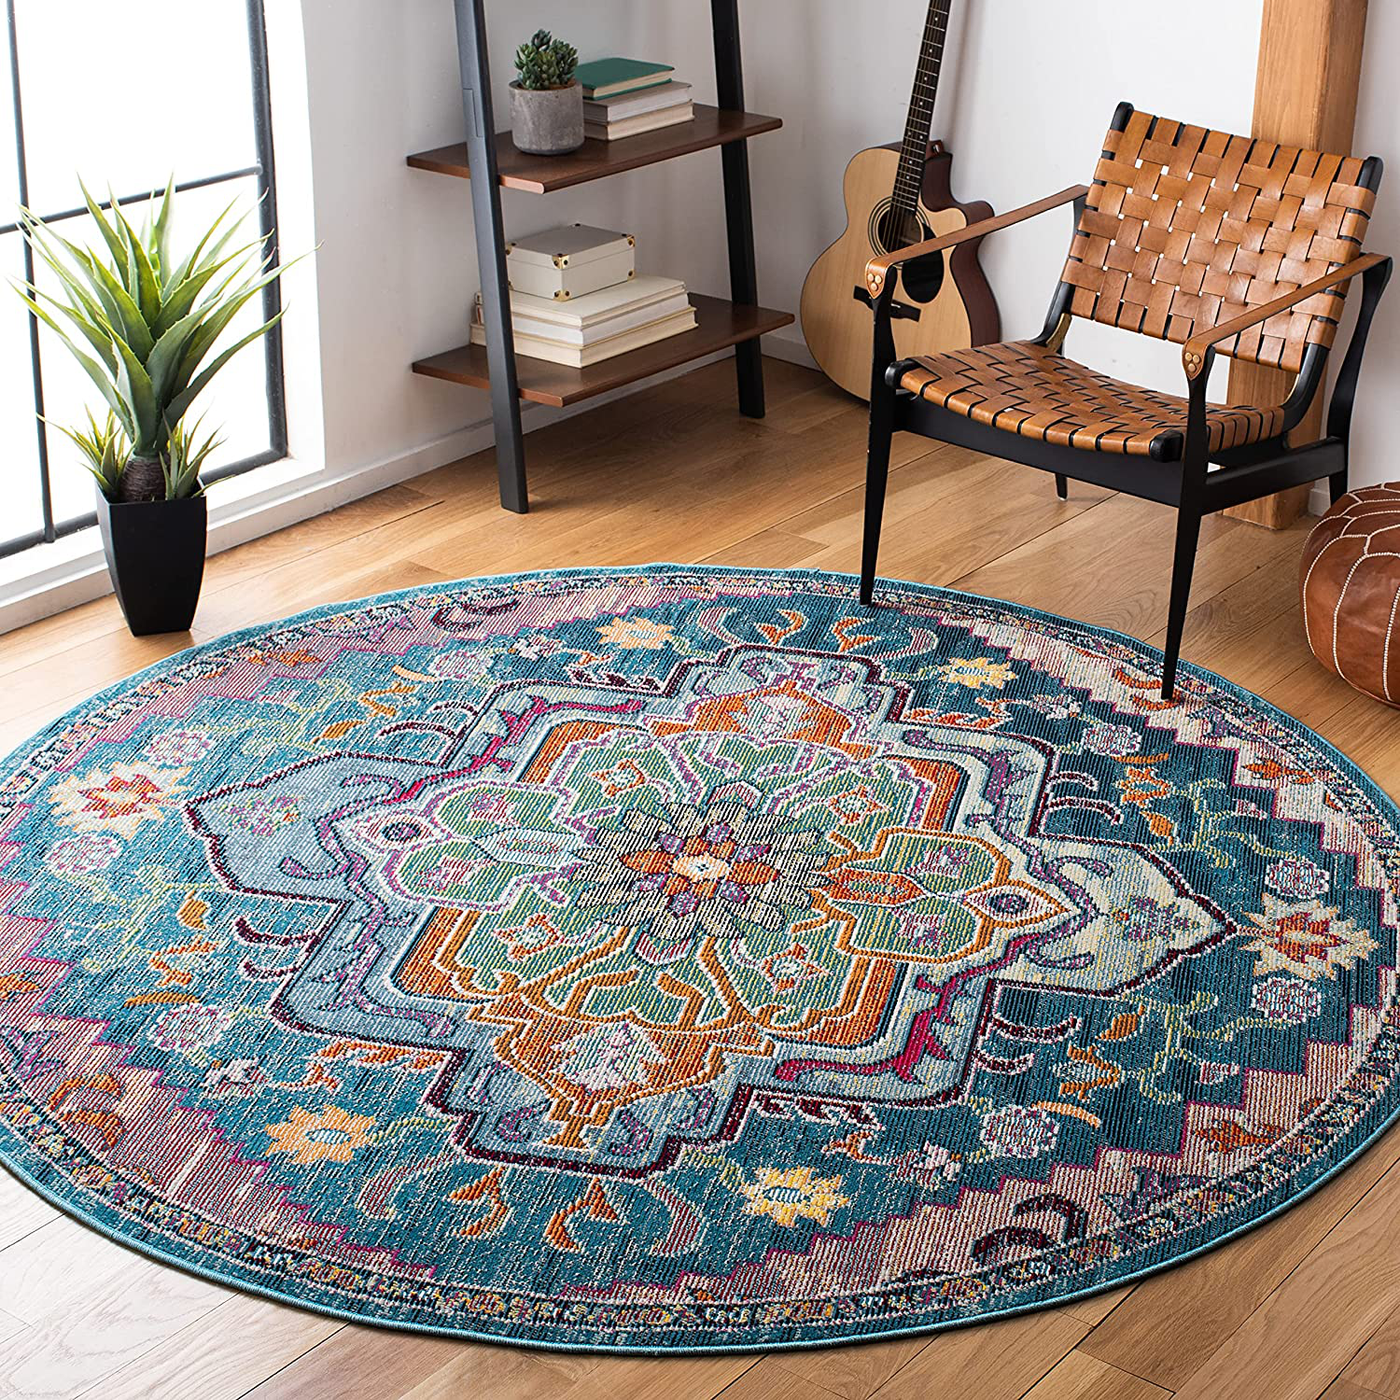 Safavieh Crystal Collection CRS501T Boho Chic Oriental Medallion Distressed Non-Shedding Stain Resistant Living Room Bedroom Area Rug, 3' x 5', Teal / Rose